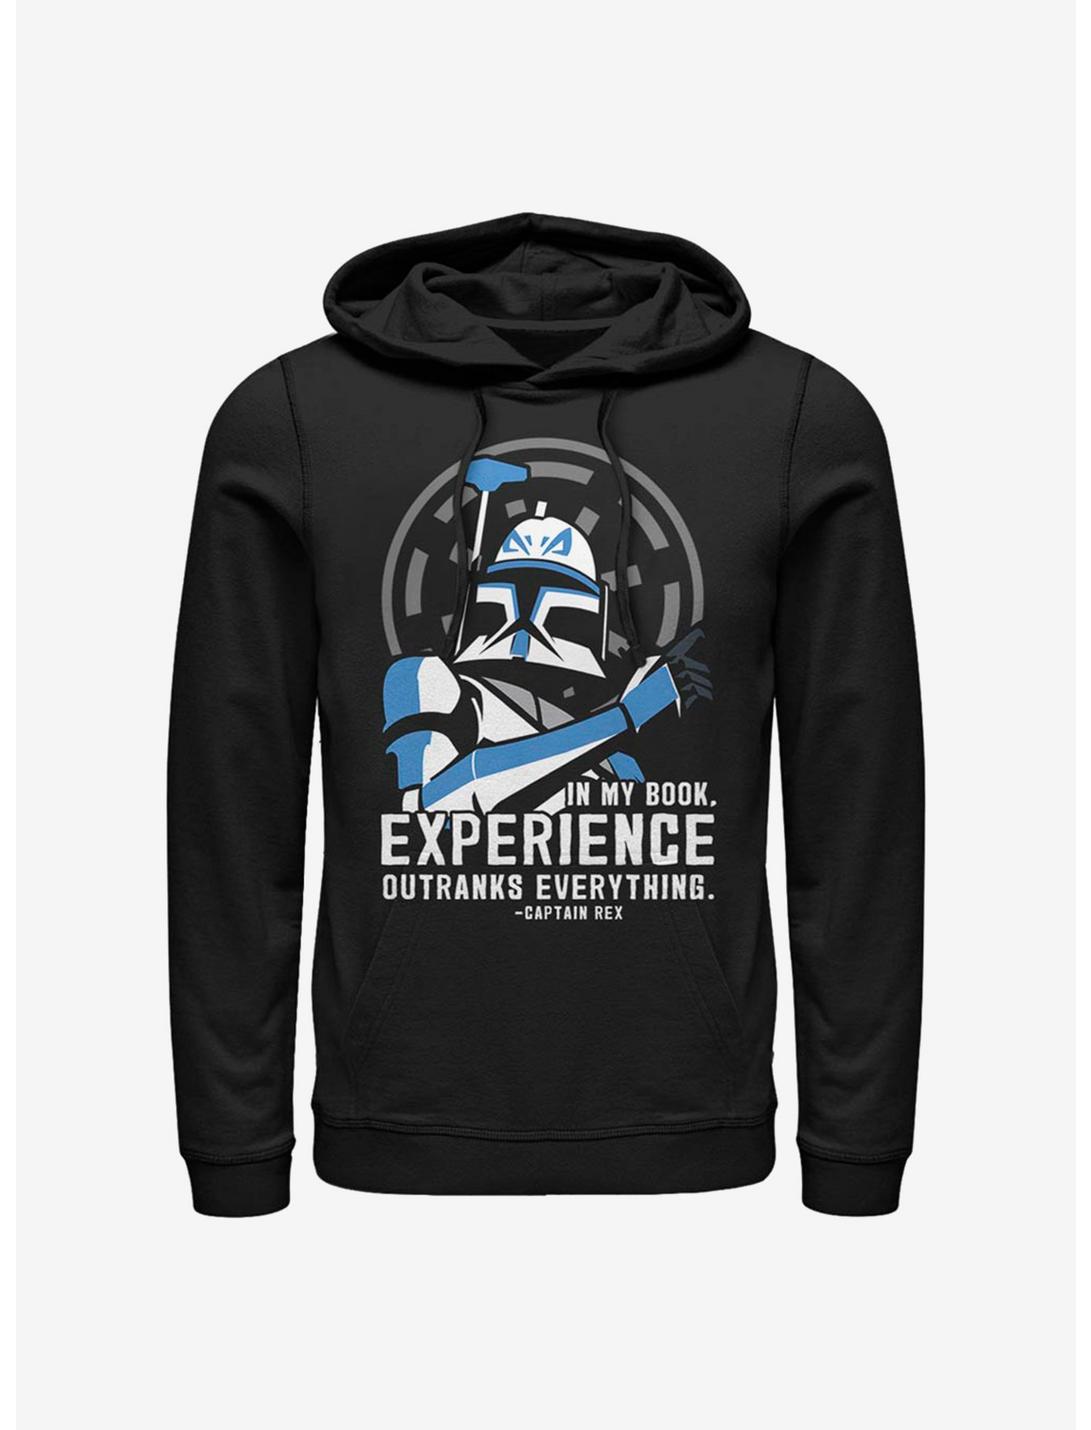 Star Wars: The Clone Wars Outranks Everything Hoodie, BLACK, hi-res